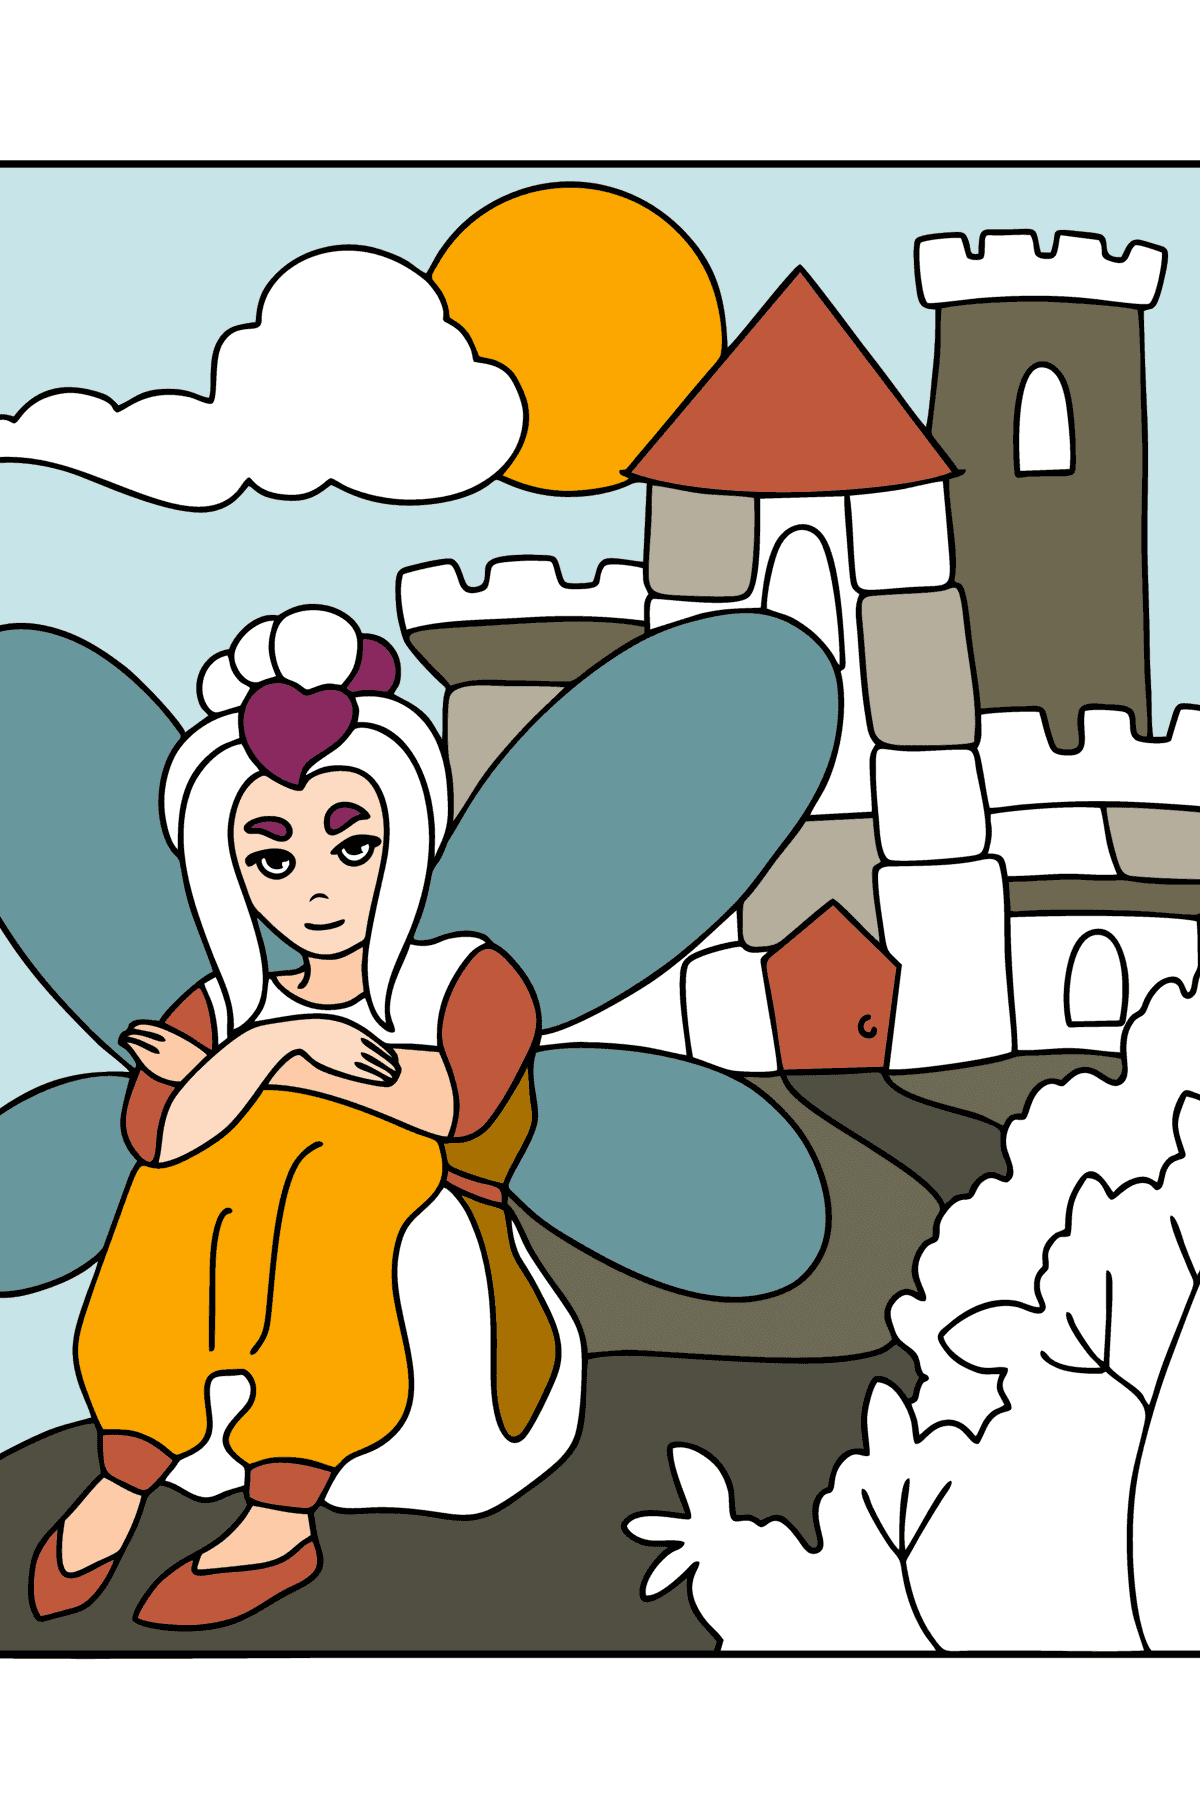 Fairy at the castle coloring page - Coloring Pages for Kids